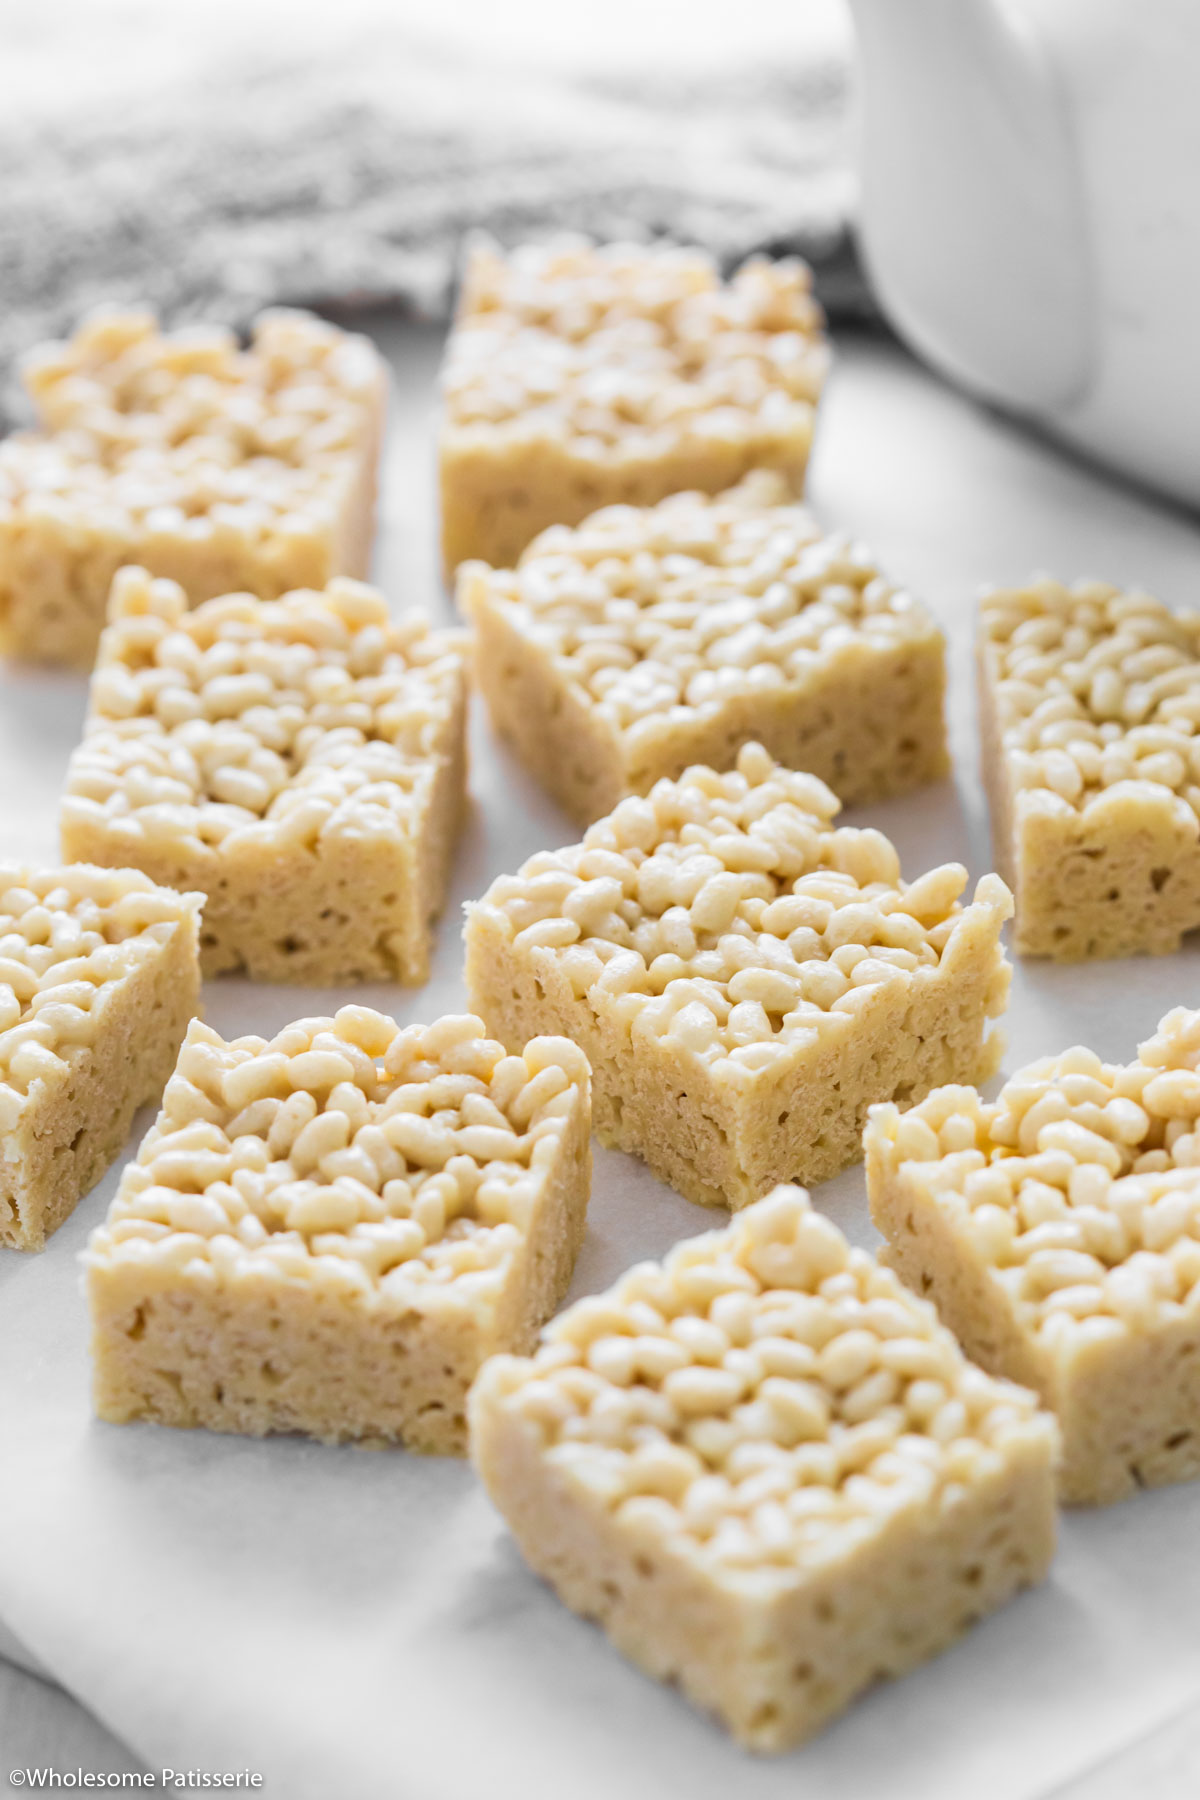 Rice bubble slice with white chocolate sliced into squares sitting on white platter.